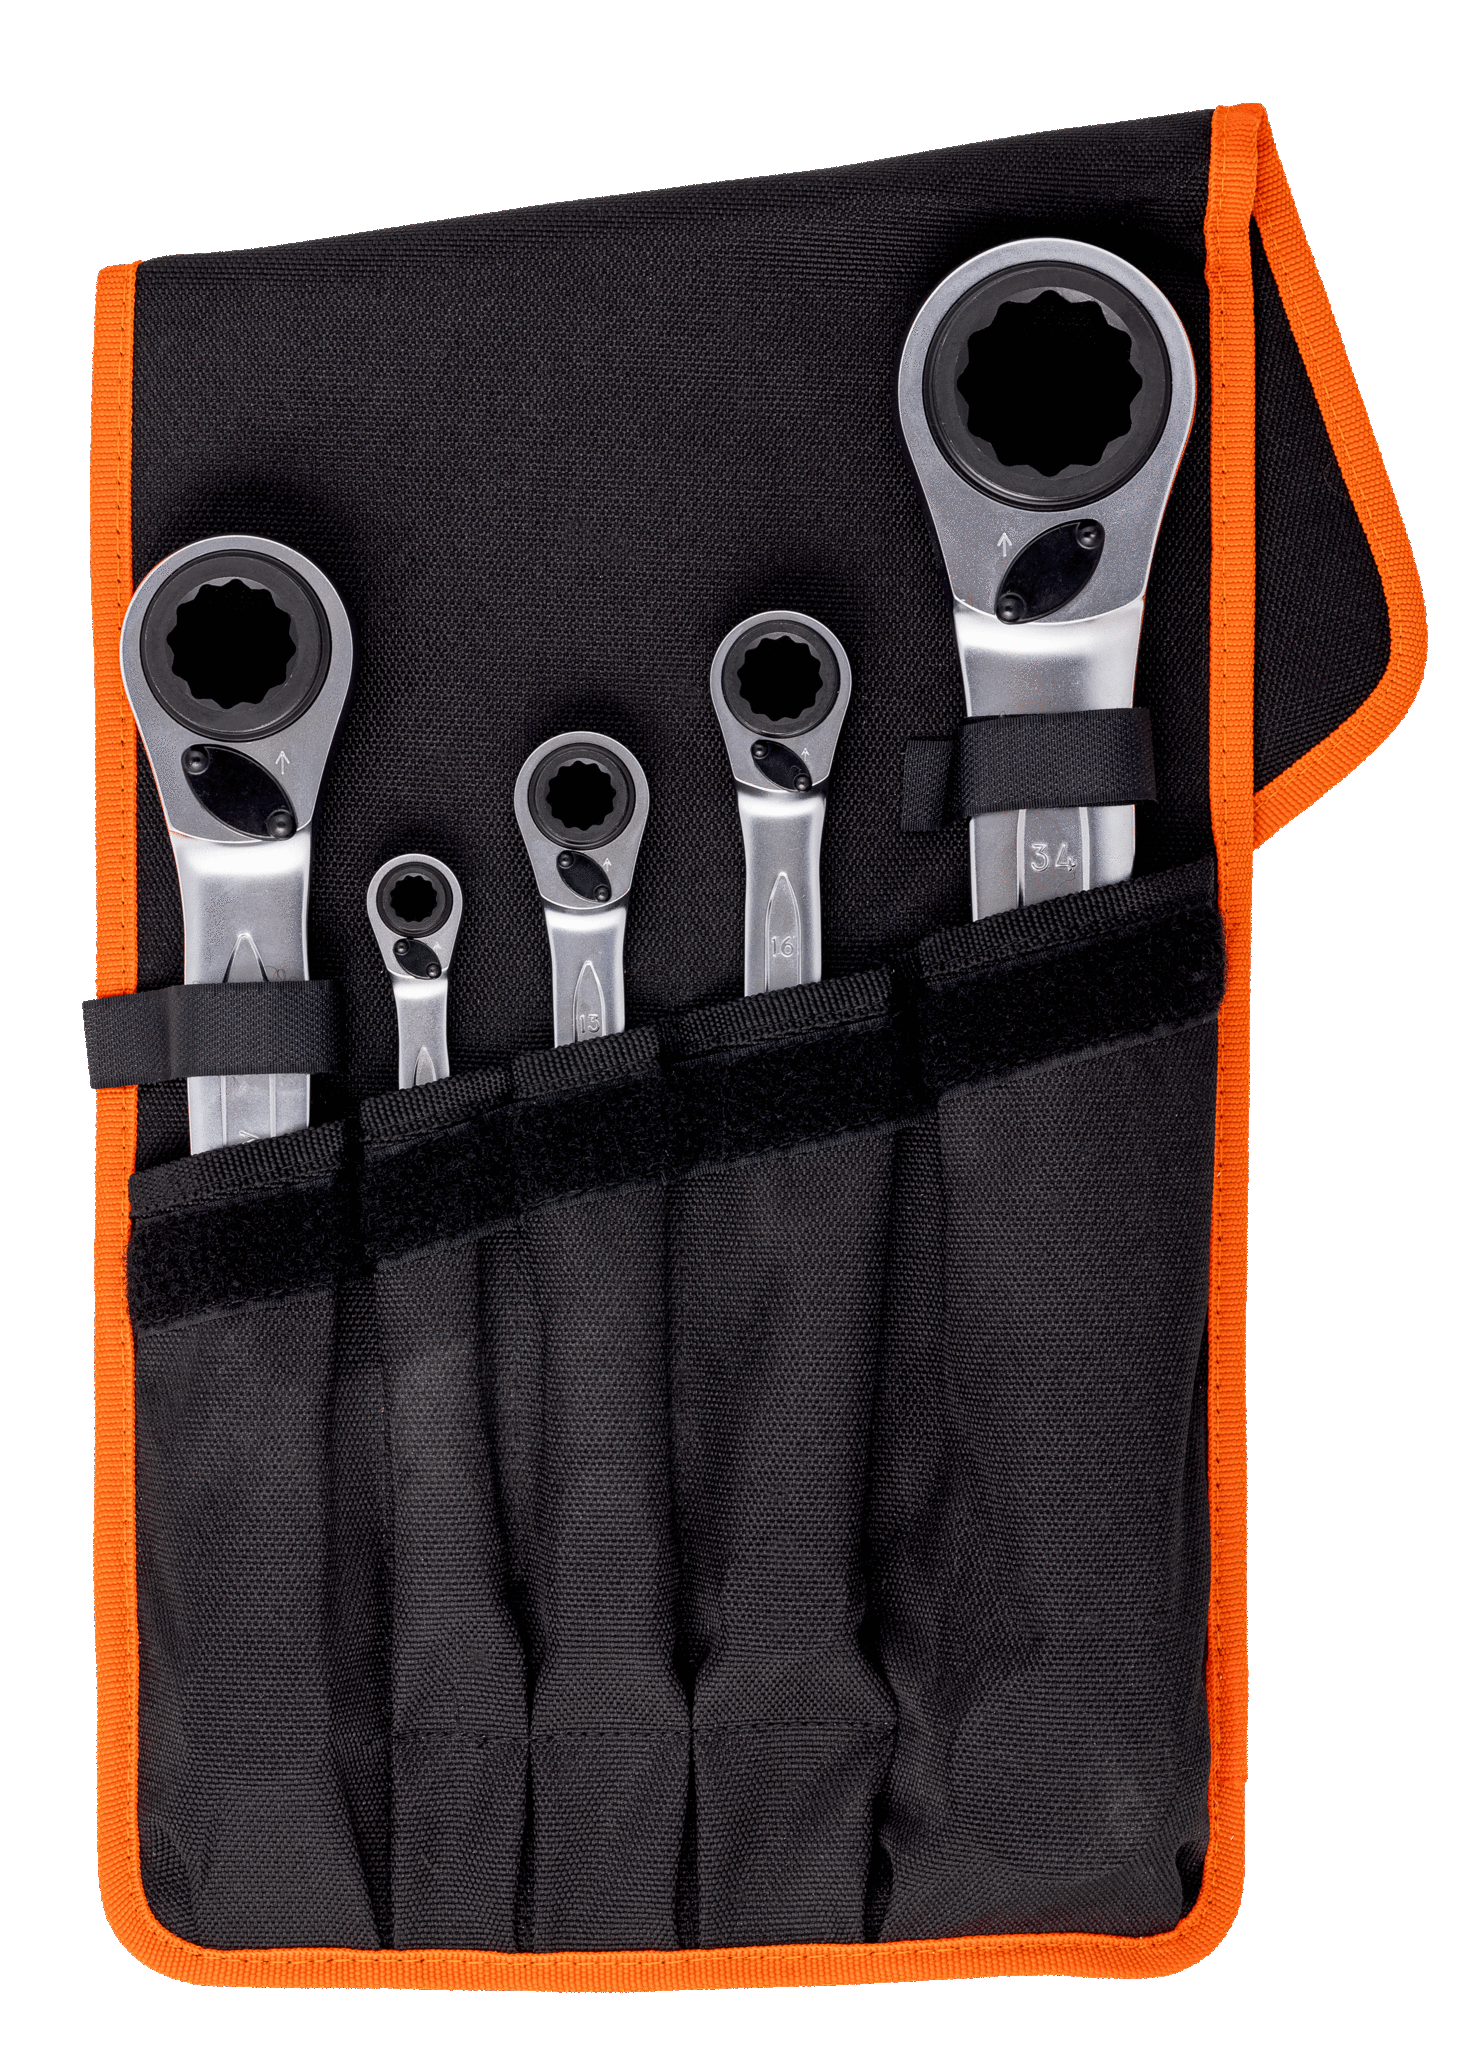 5Pce 4-in-1 Ratcheting Ring Wrench Set S4RM/5T by Bahco